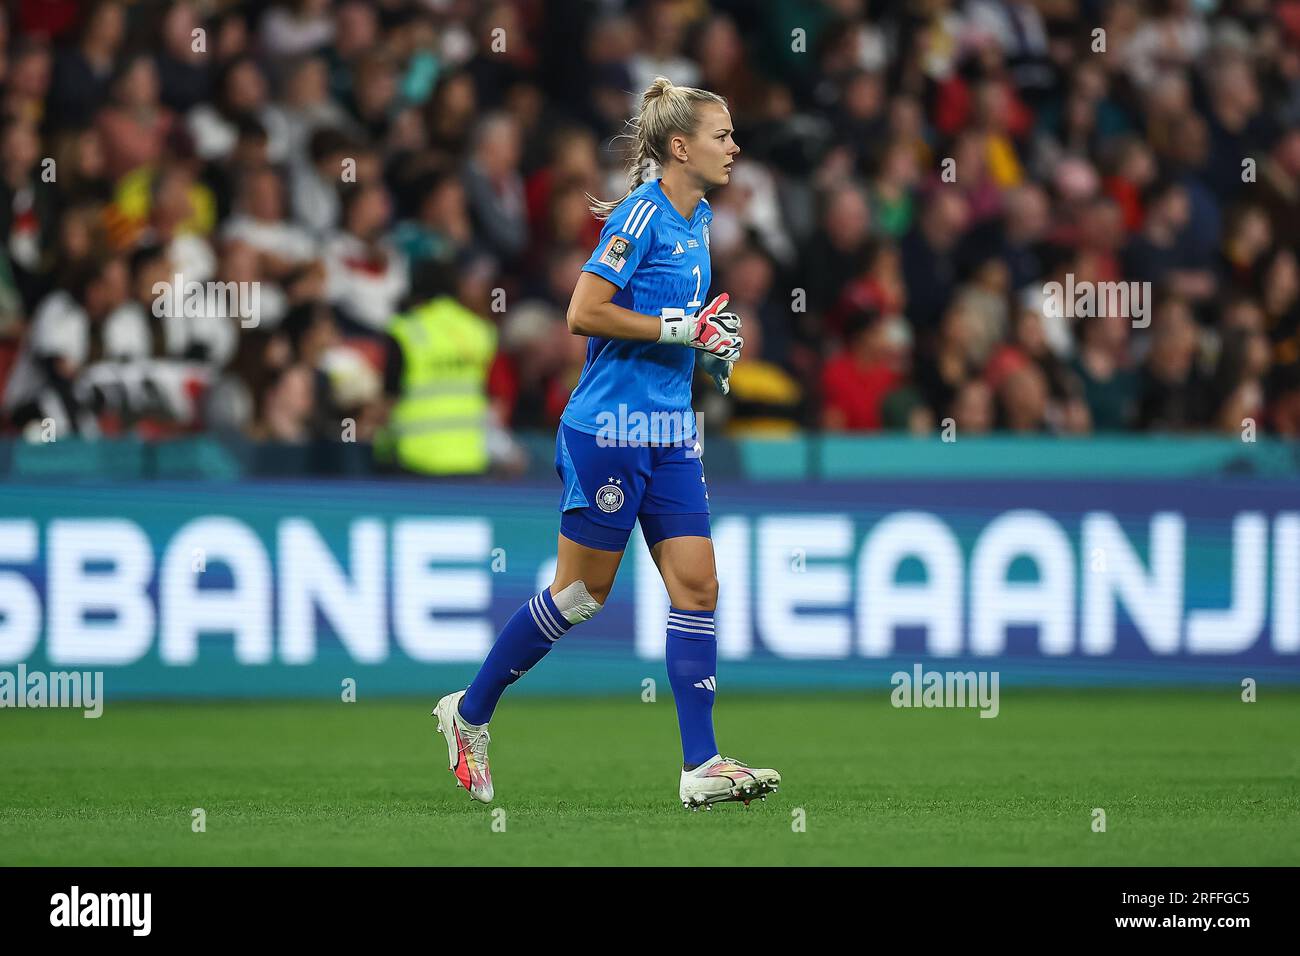 Merle Frohms #1 of Germany during the FIFA Women's World Cup 2023 Group H match South Korea vs Germany Women at Suncorp Stadium, Brisbane, Australia, 3rd August 2023 (Photo by Patrick Hoelscher/News Images) Credit: News Images LTD/Alamy Live News Stock Photo